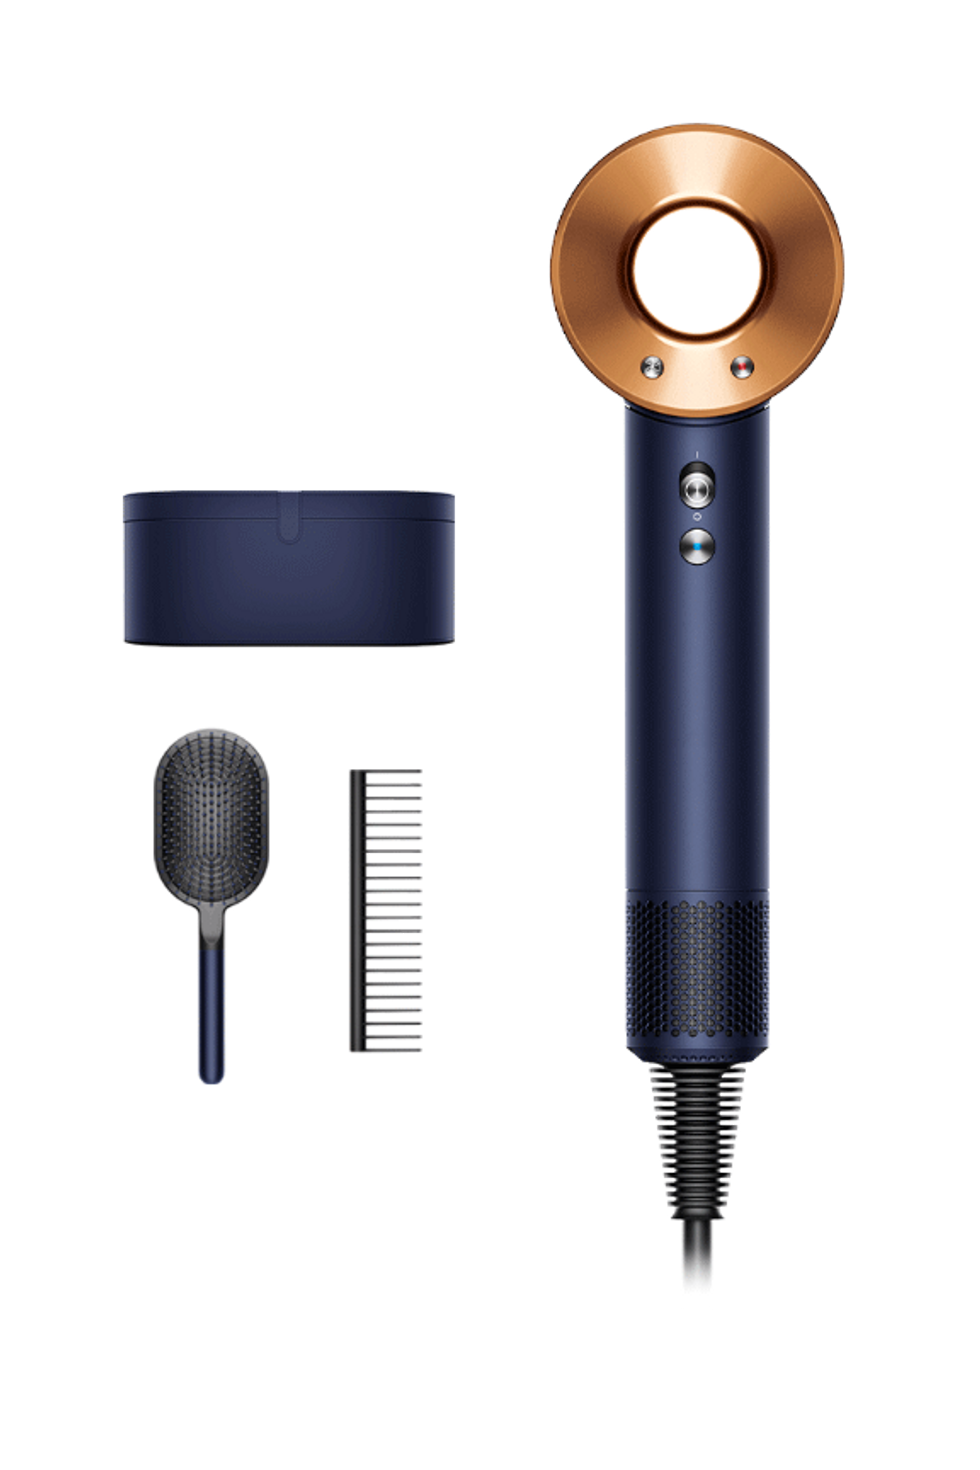 Special Edition Dyson Supersonic(tm) Prussian Blue/Rich Copper hair dryer